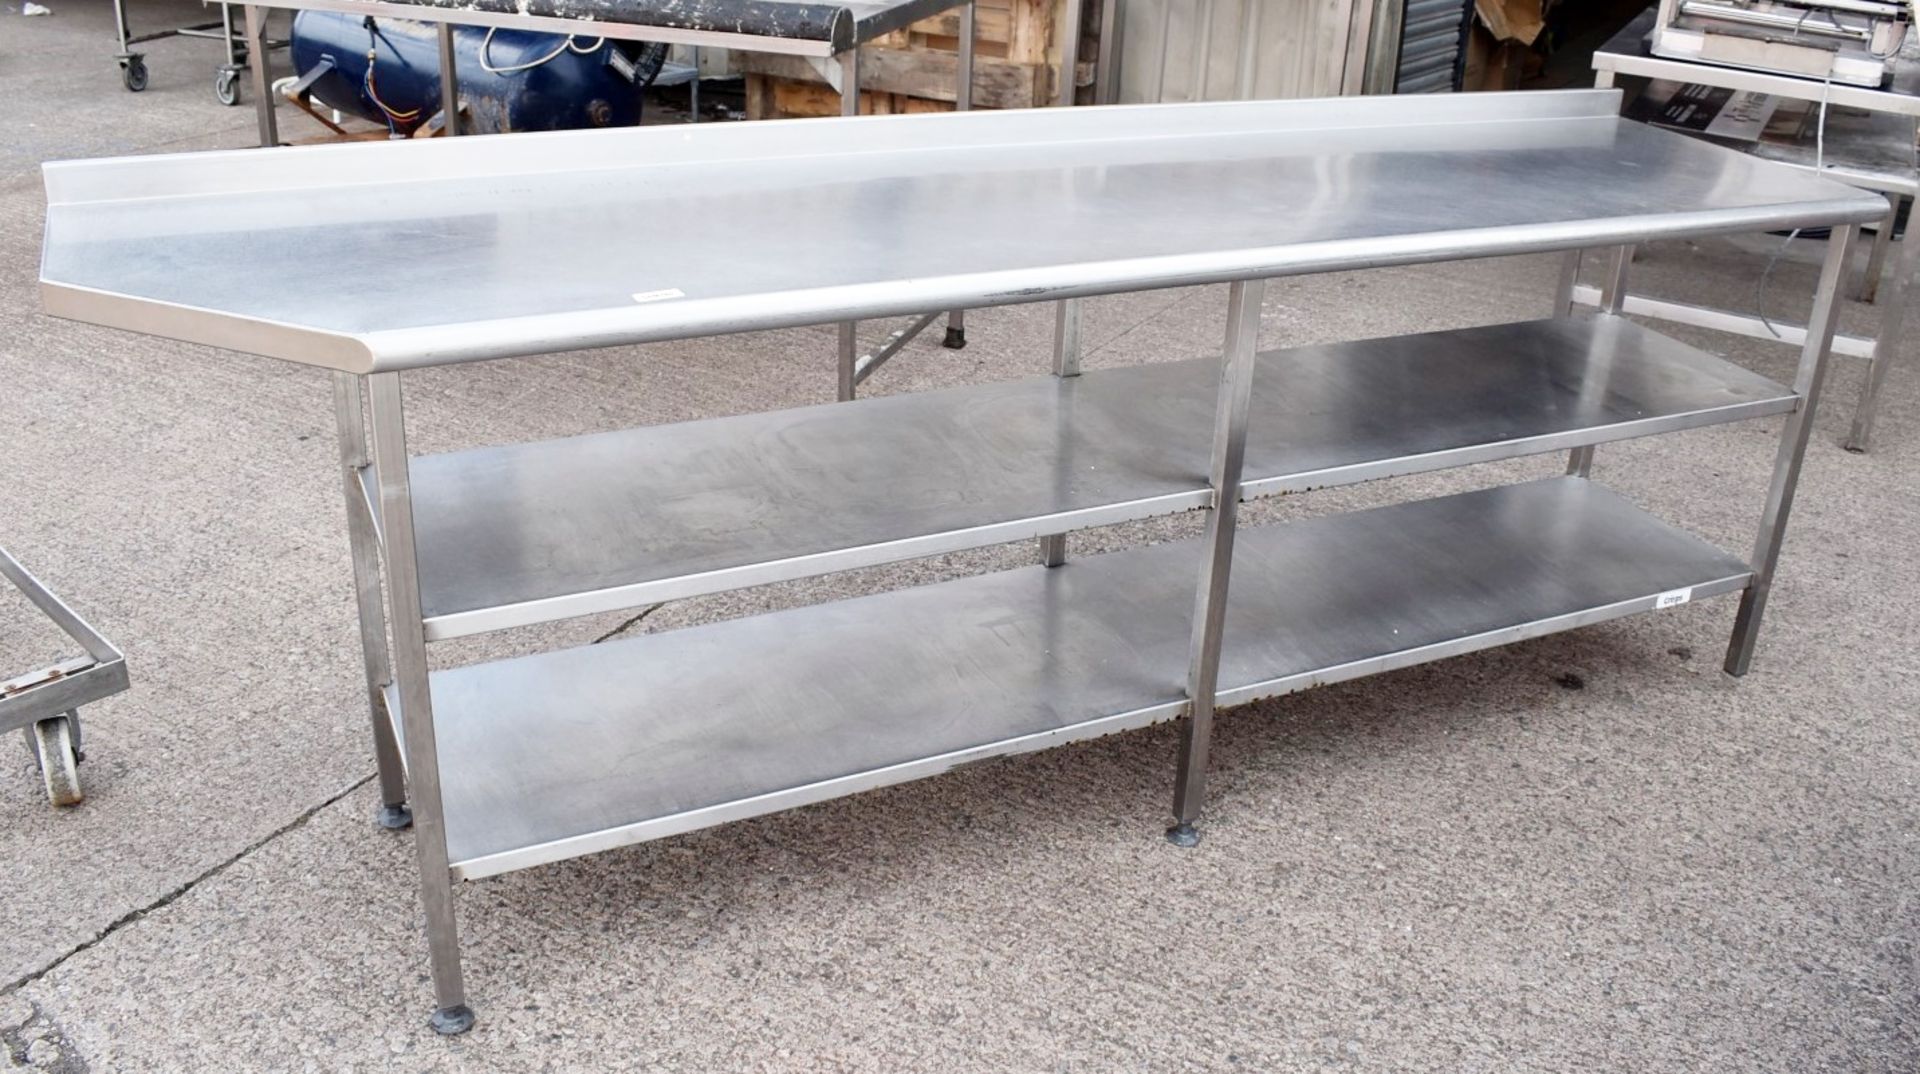 1 x Large 8ft Commercial Kitchen Prep Table With Undershelves and Upstand - Stainless Steel -